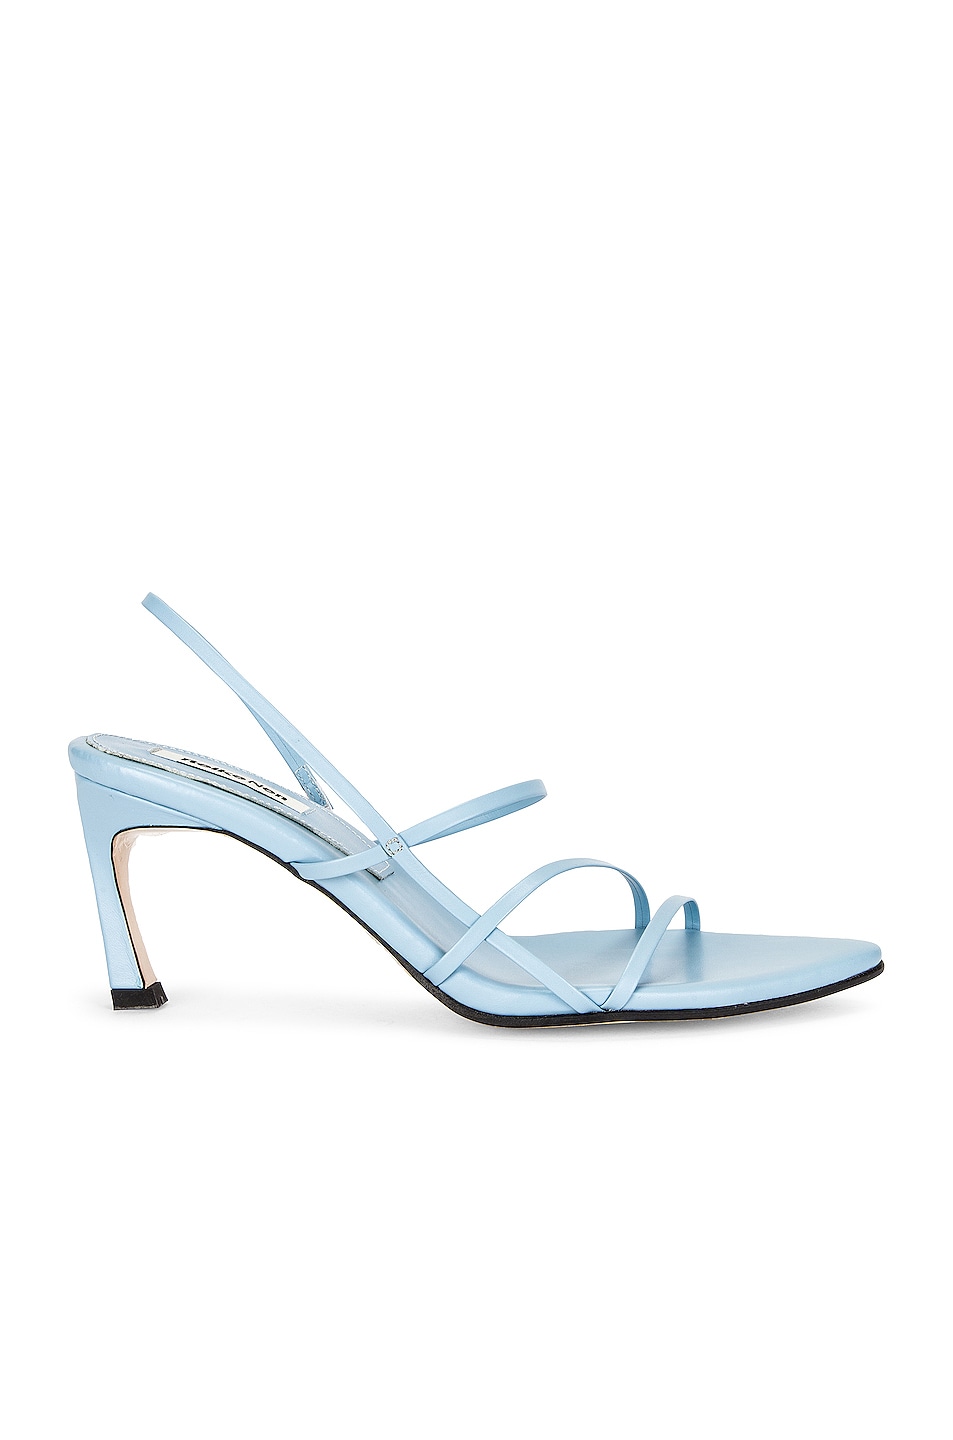 Image 1 of Reike Nen 3 Strappy Pointed Sandal in Sky Blue